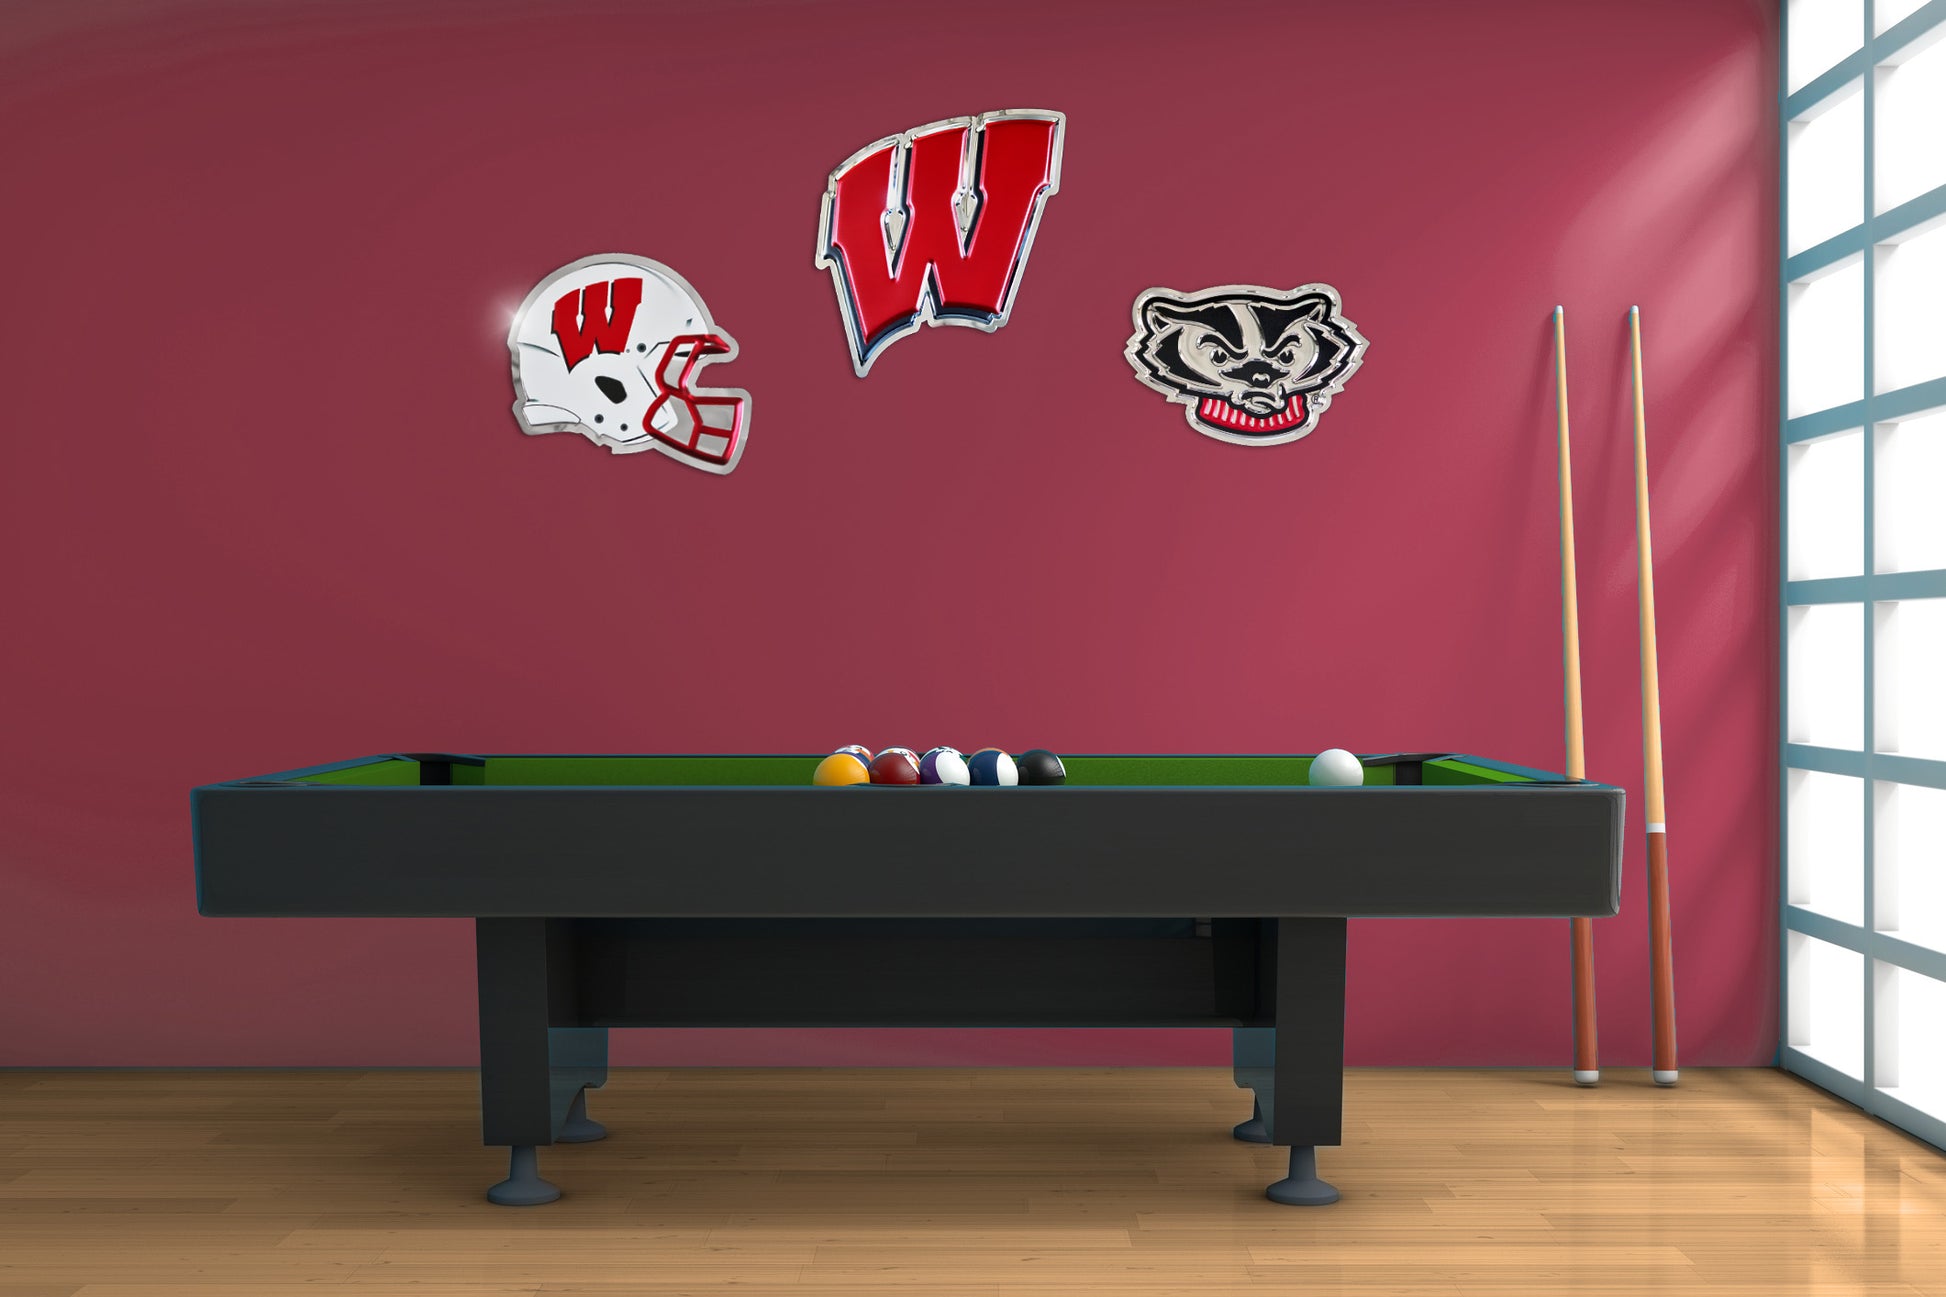 embossed mirror polished stainless steel sign garage décor Wisconsin Badgers Motion W on wall